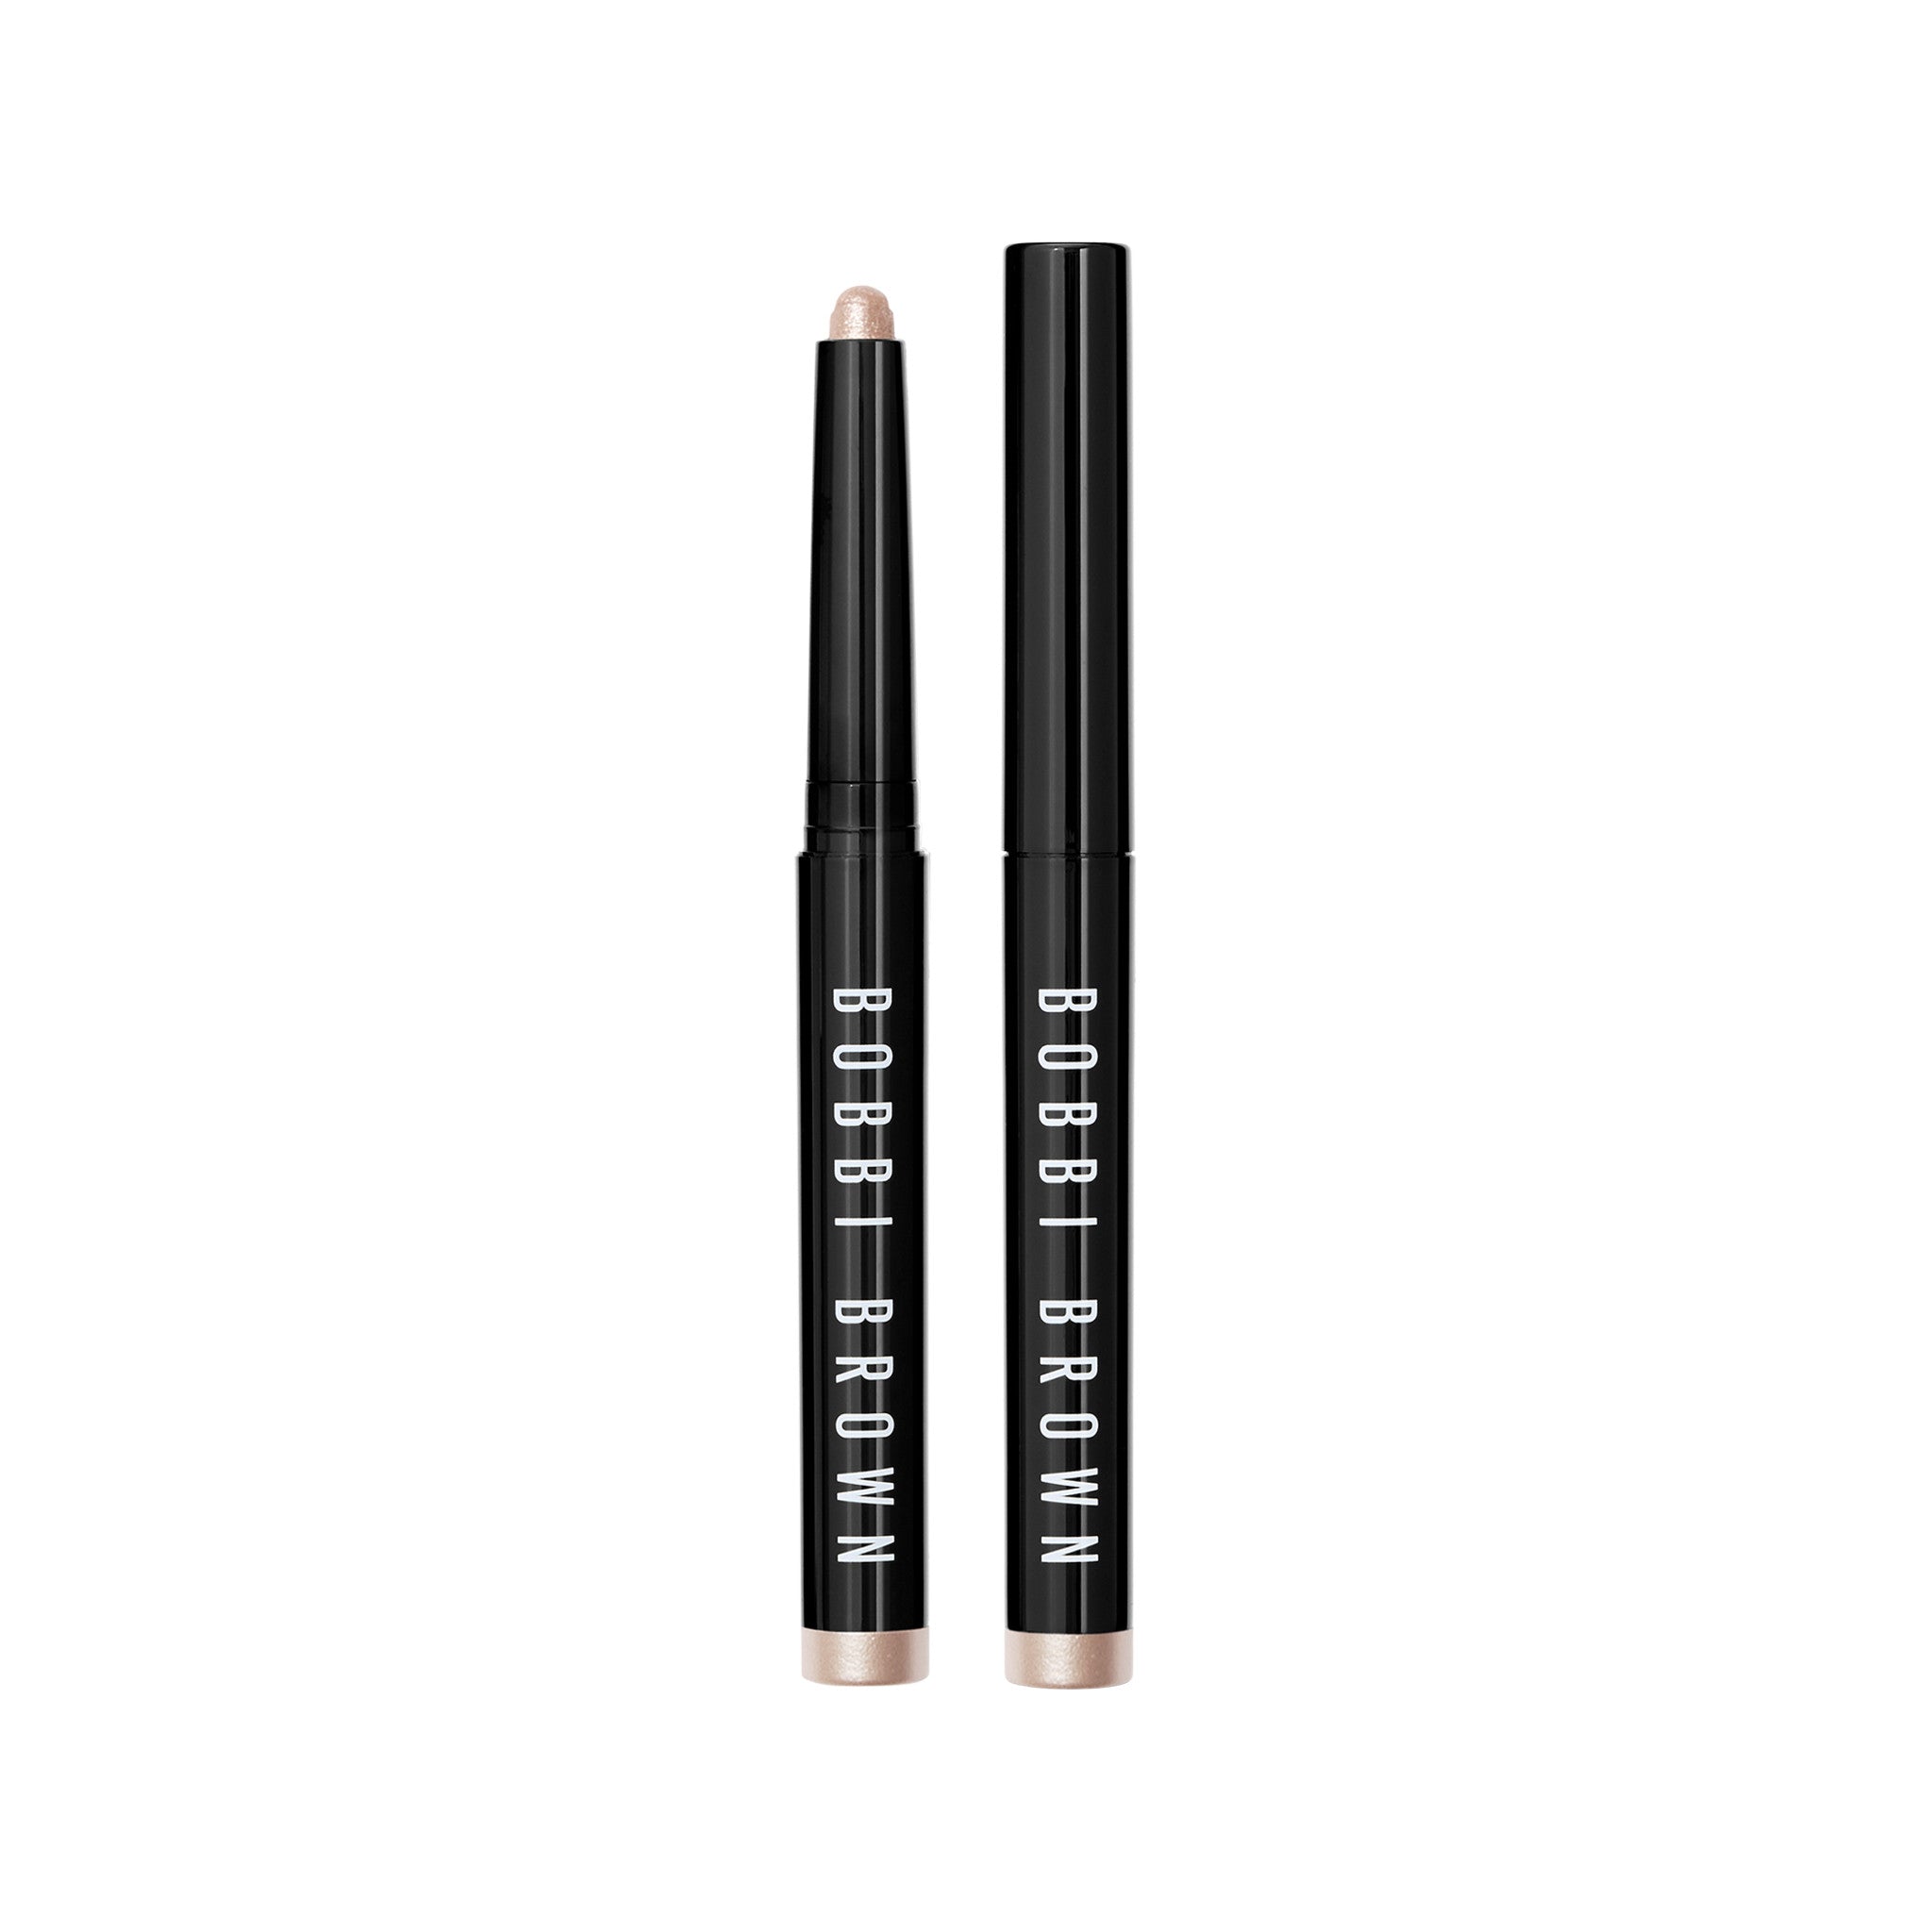 Bobbi Brown Long-Wear Cream Shadow Stick Color/Shade variant: Moonstone main image. This product is in the color white